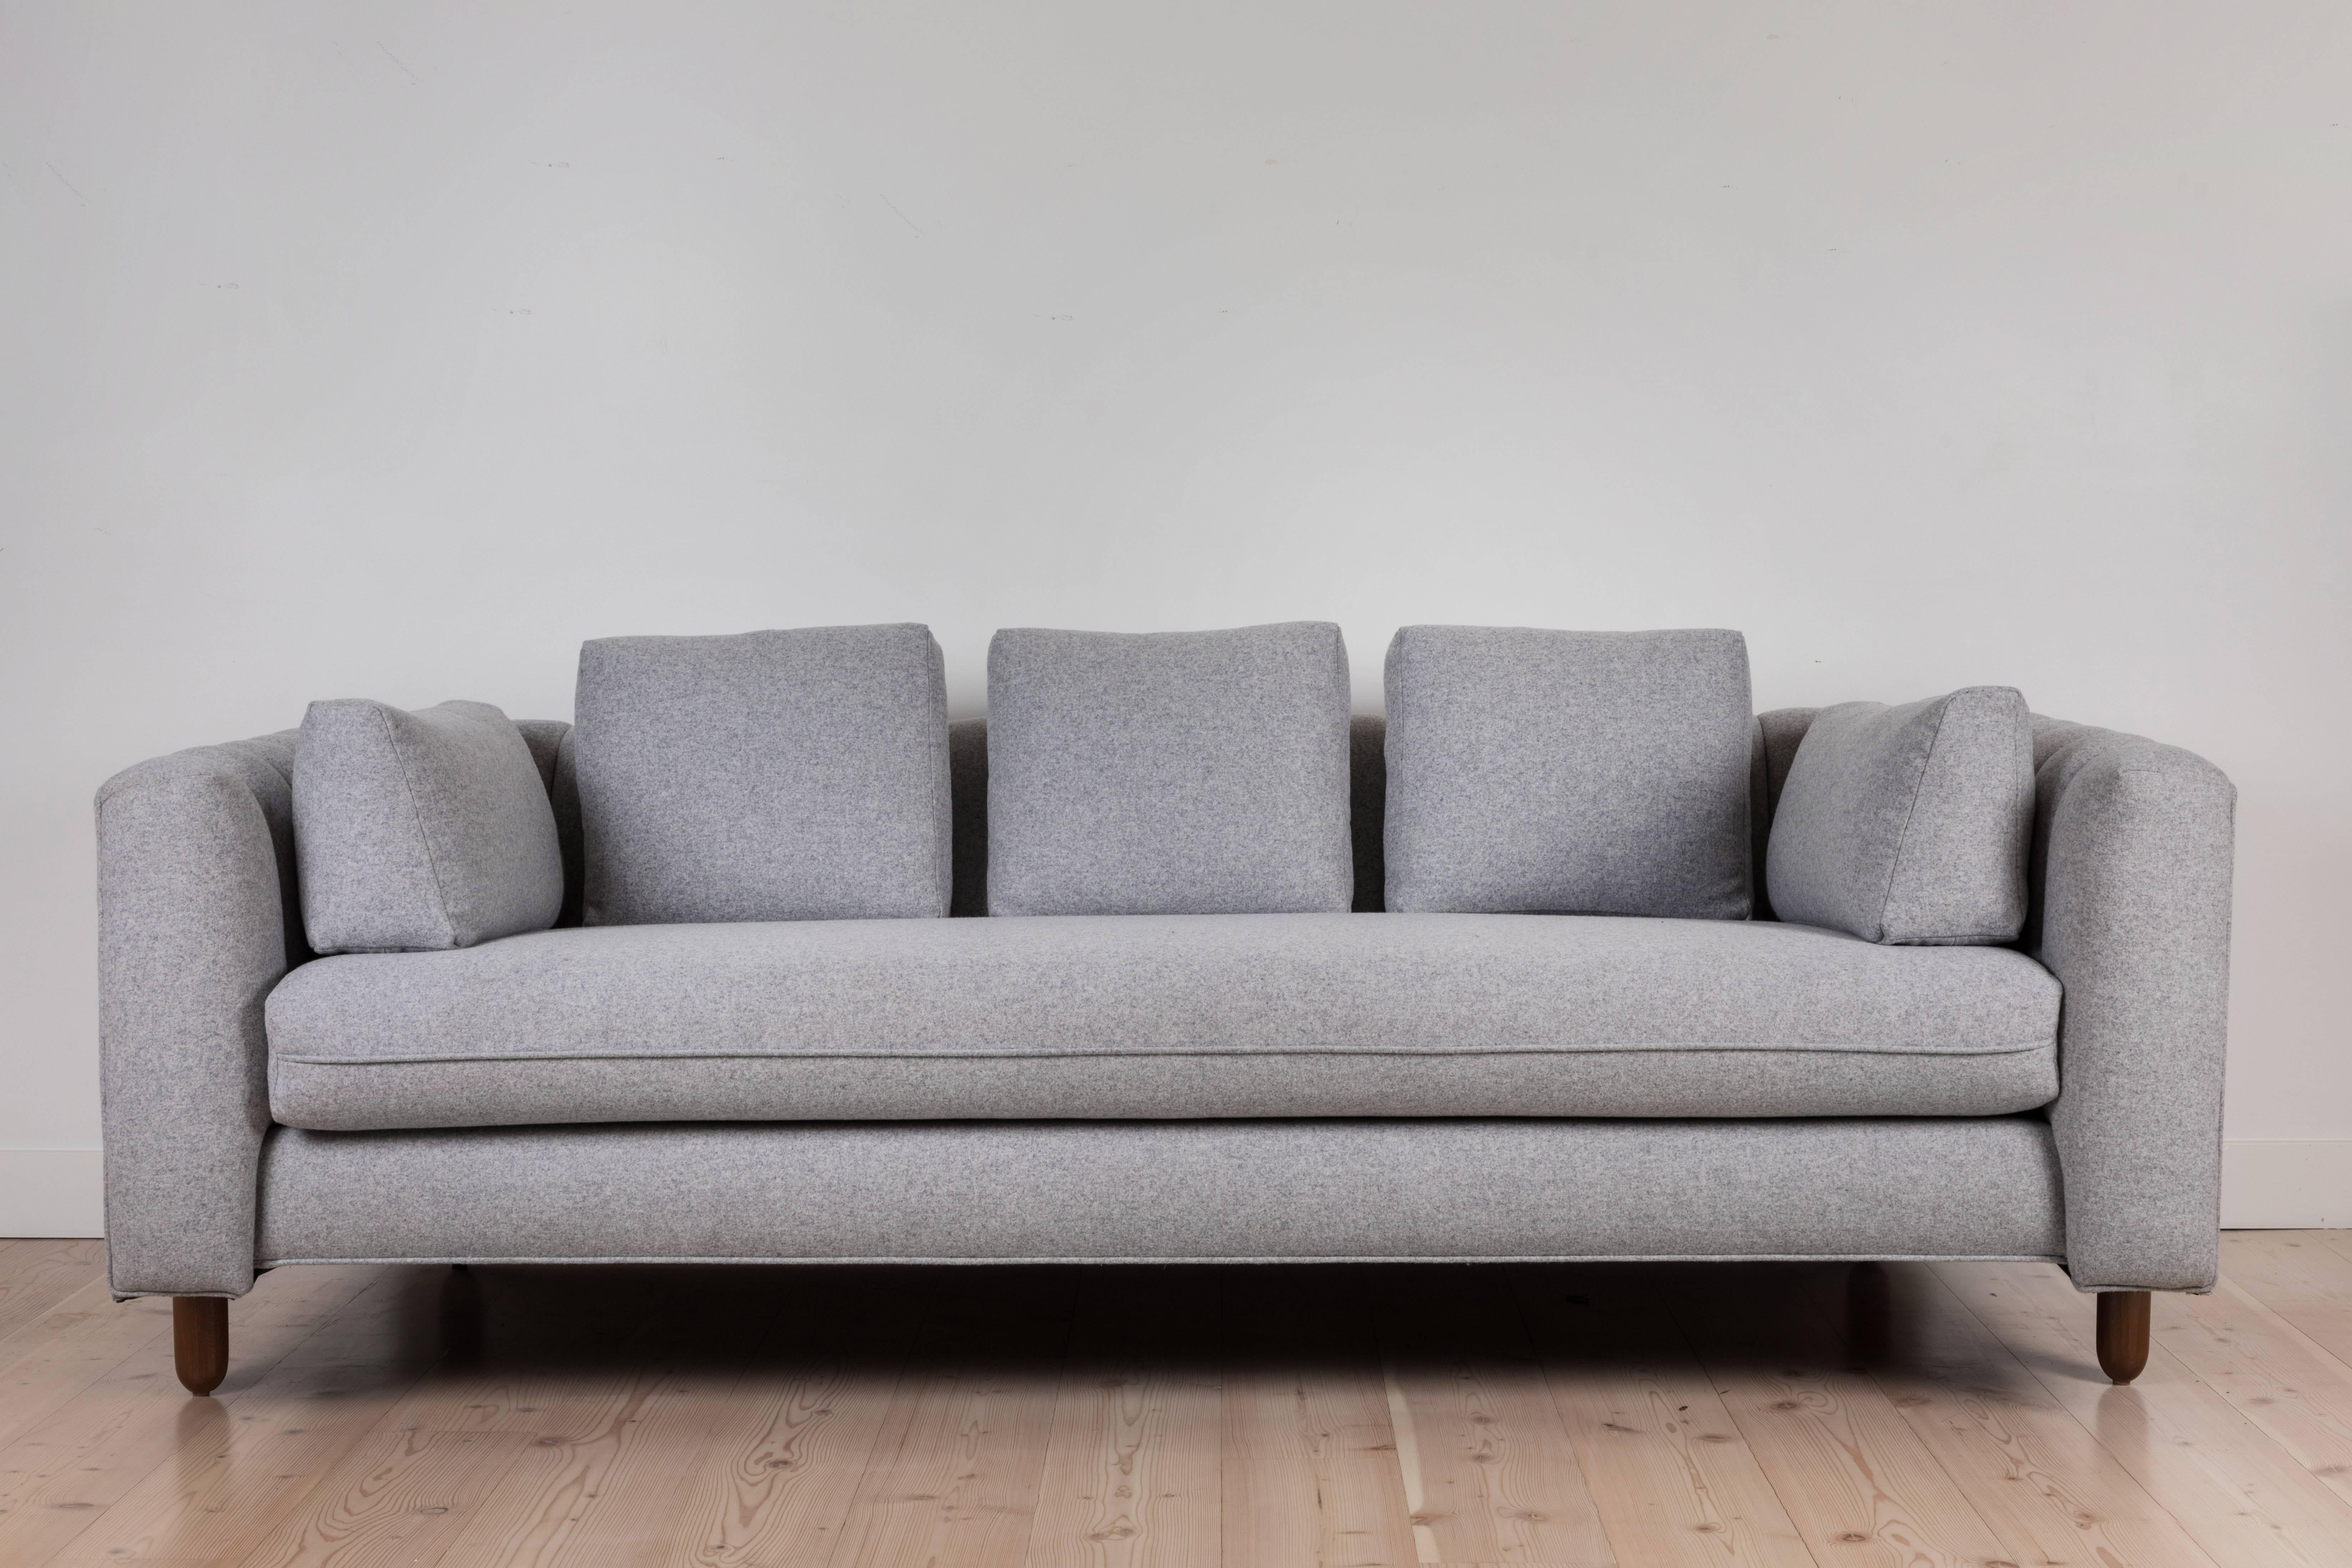 The Isherwood Sofa features a channel tufted body with loose bolster cushions. The turned legs are made of solid white oak or American walnut and are inset on the sides revealing the leg detail.

Available to order in Customer's Own Materials with a